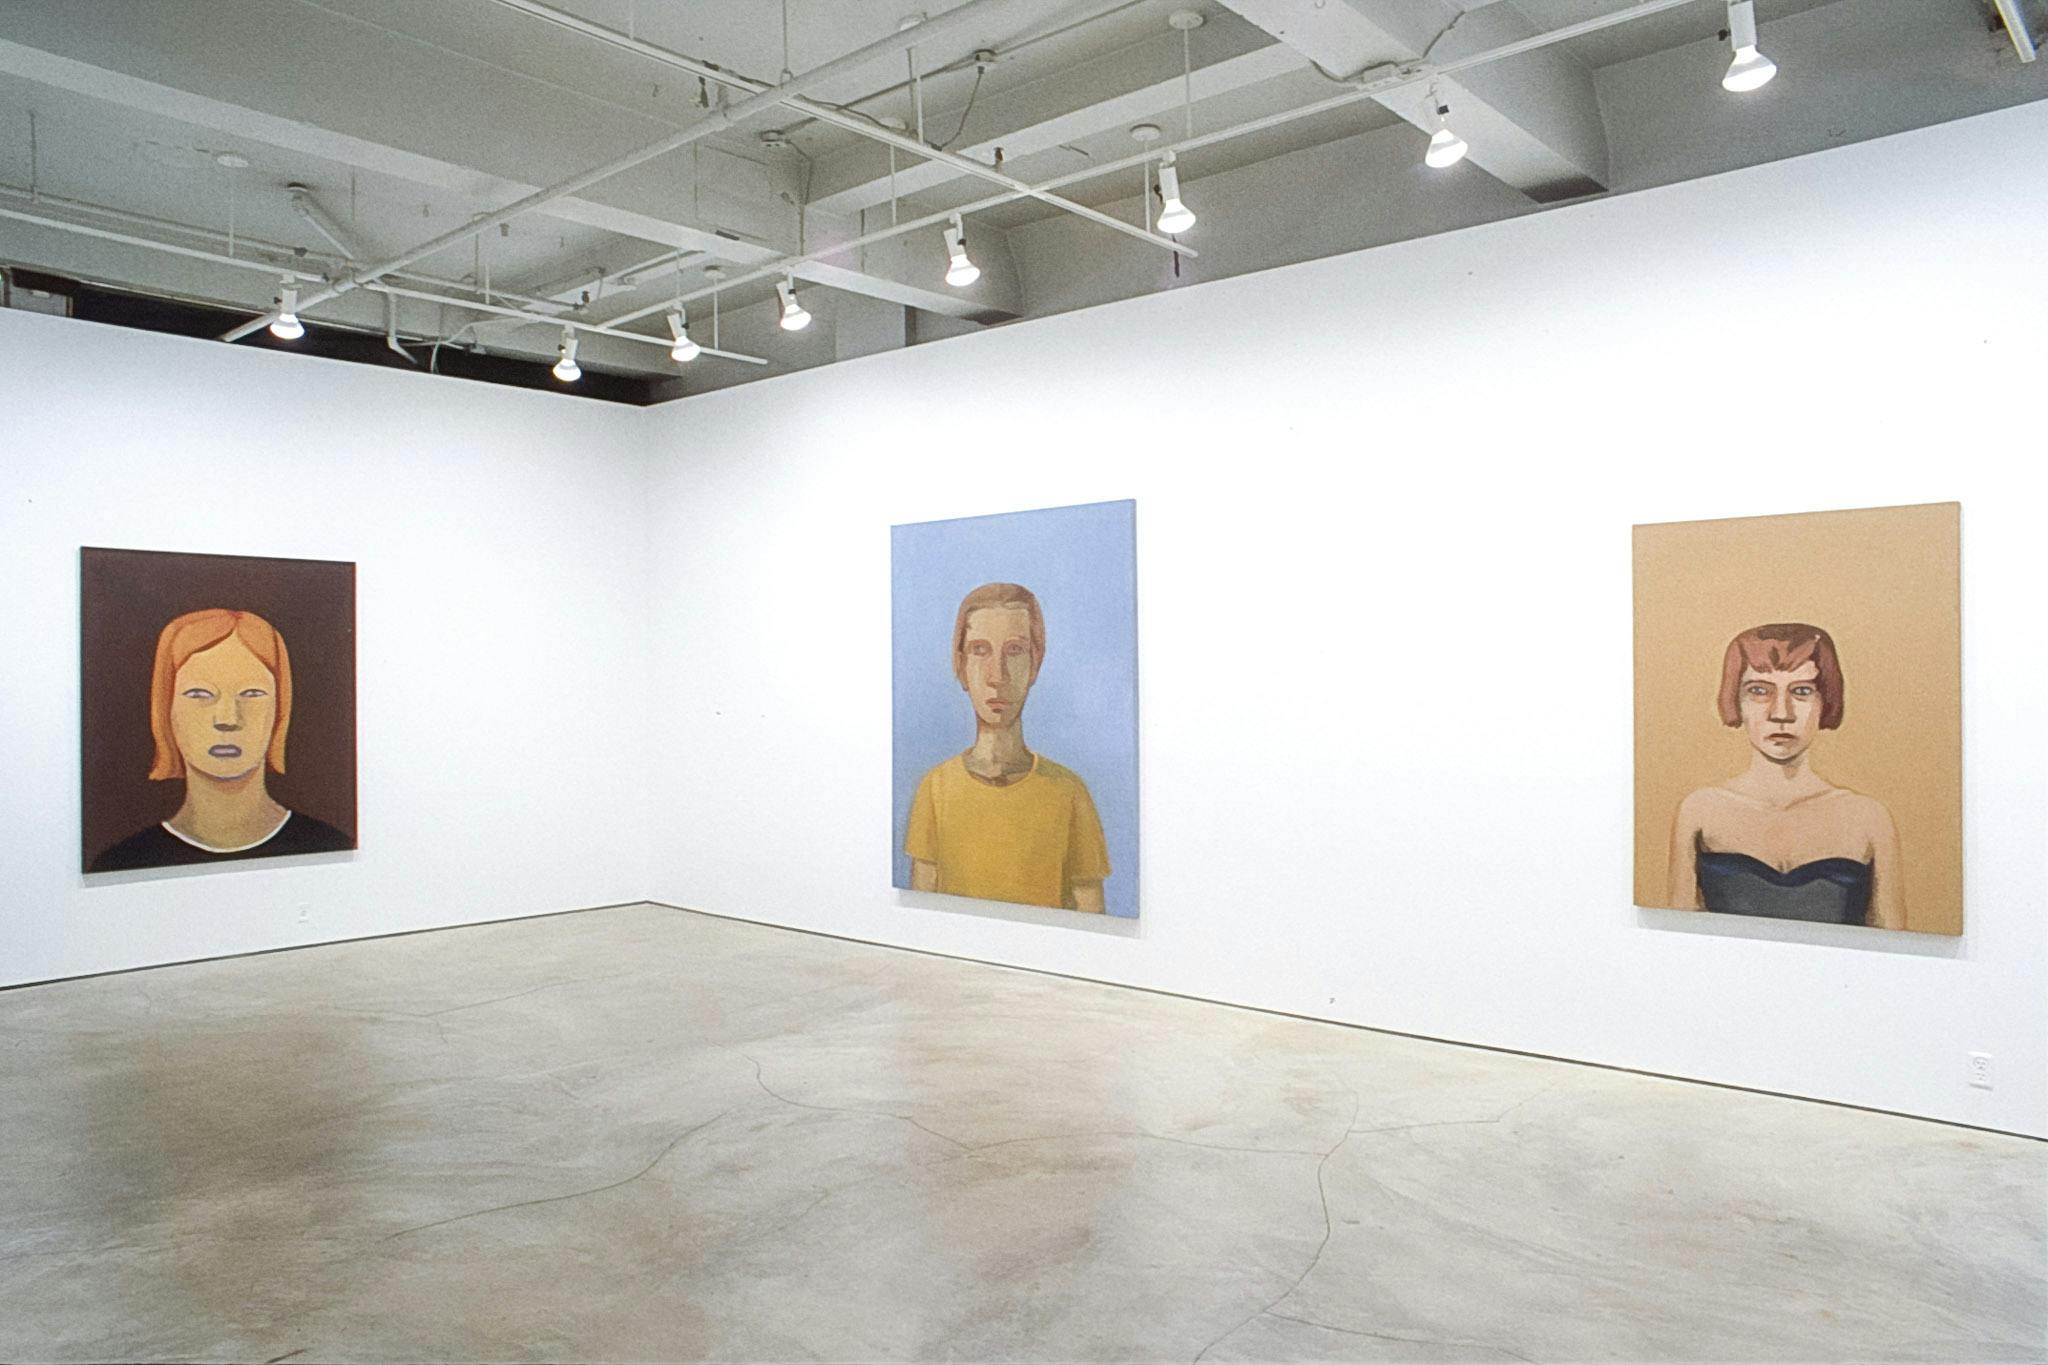 Three portrait paintings are exhibited on the galley walls. The left one is a woman in a brown background, the middle one is a man in a blue background. The one on the right is a woman in black.